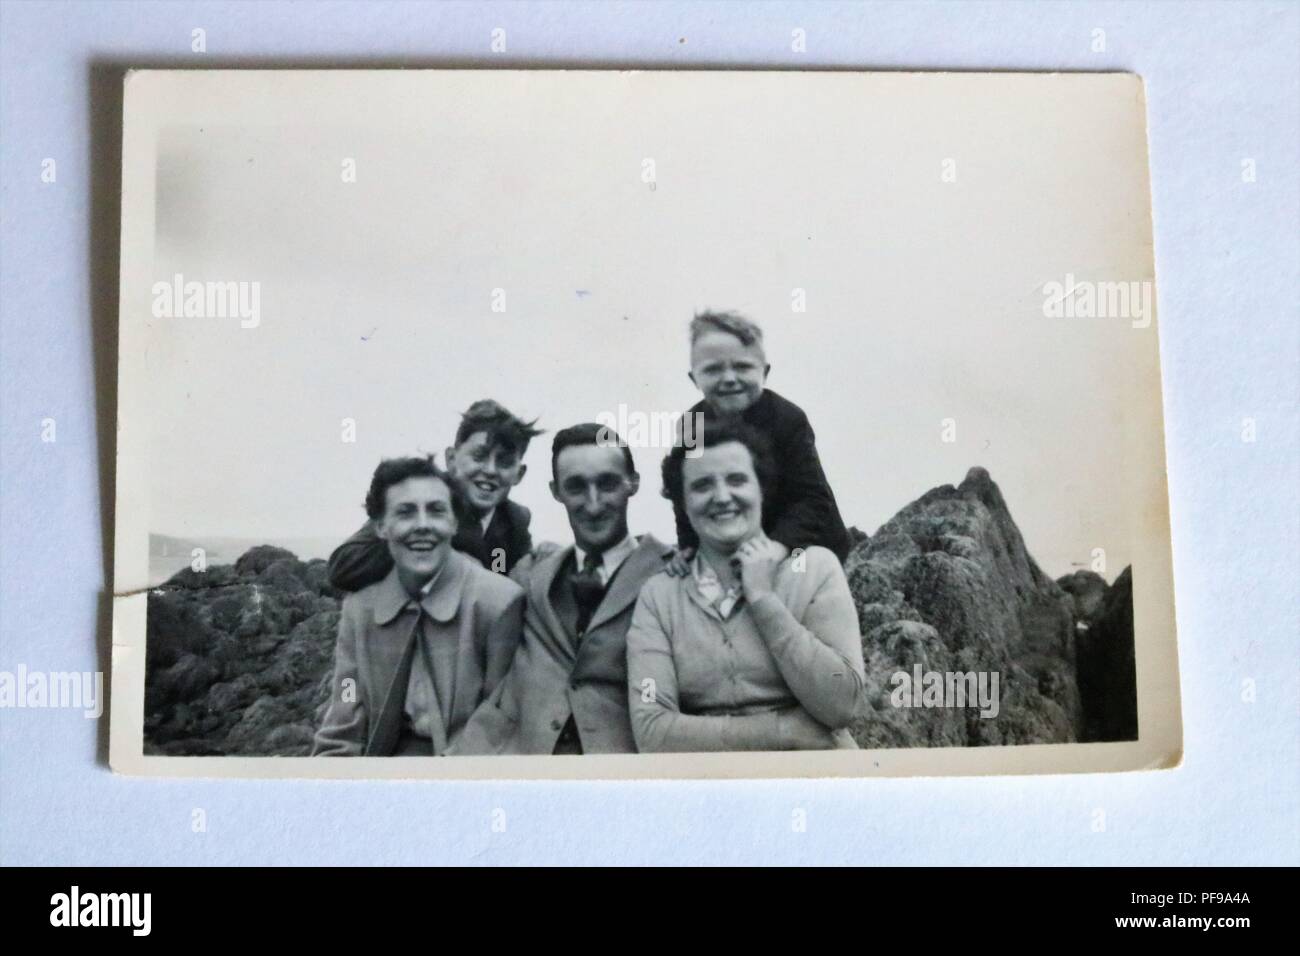 Social History - Black and white old photograph showing family posing on rocks on holiday - 1930s / 1940s Stock Photo